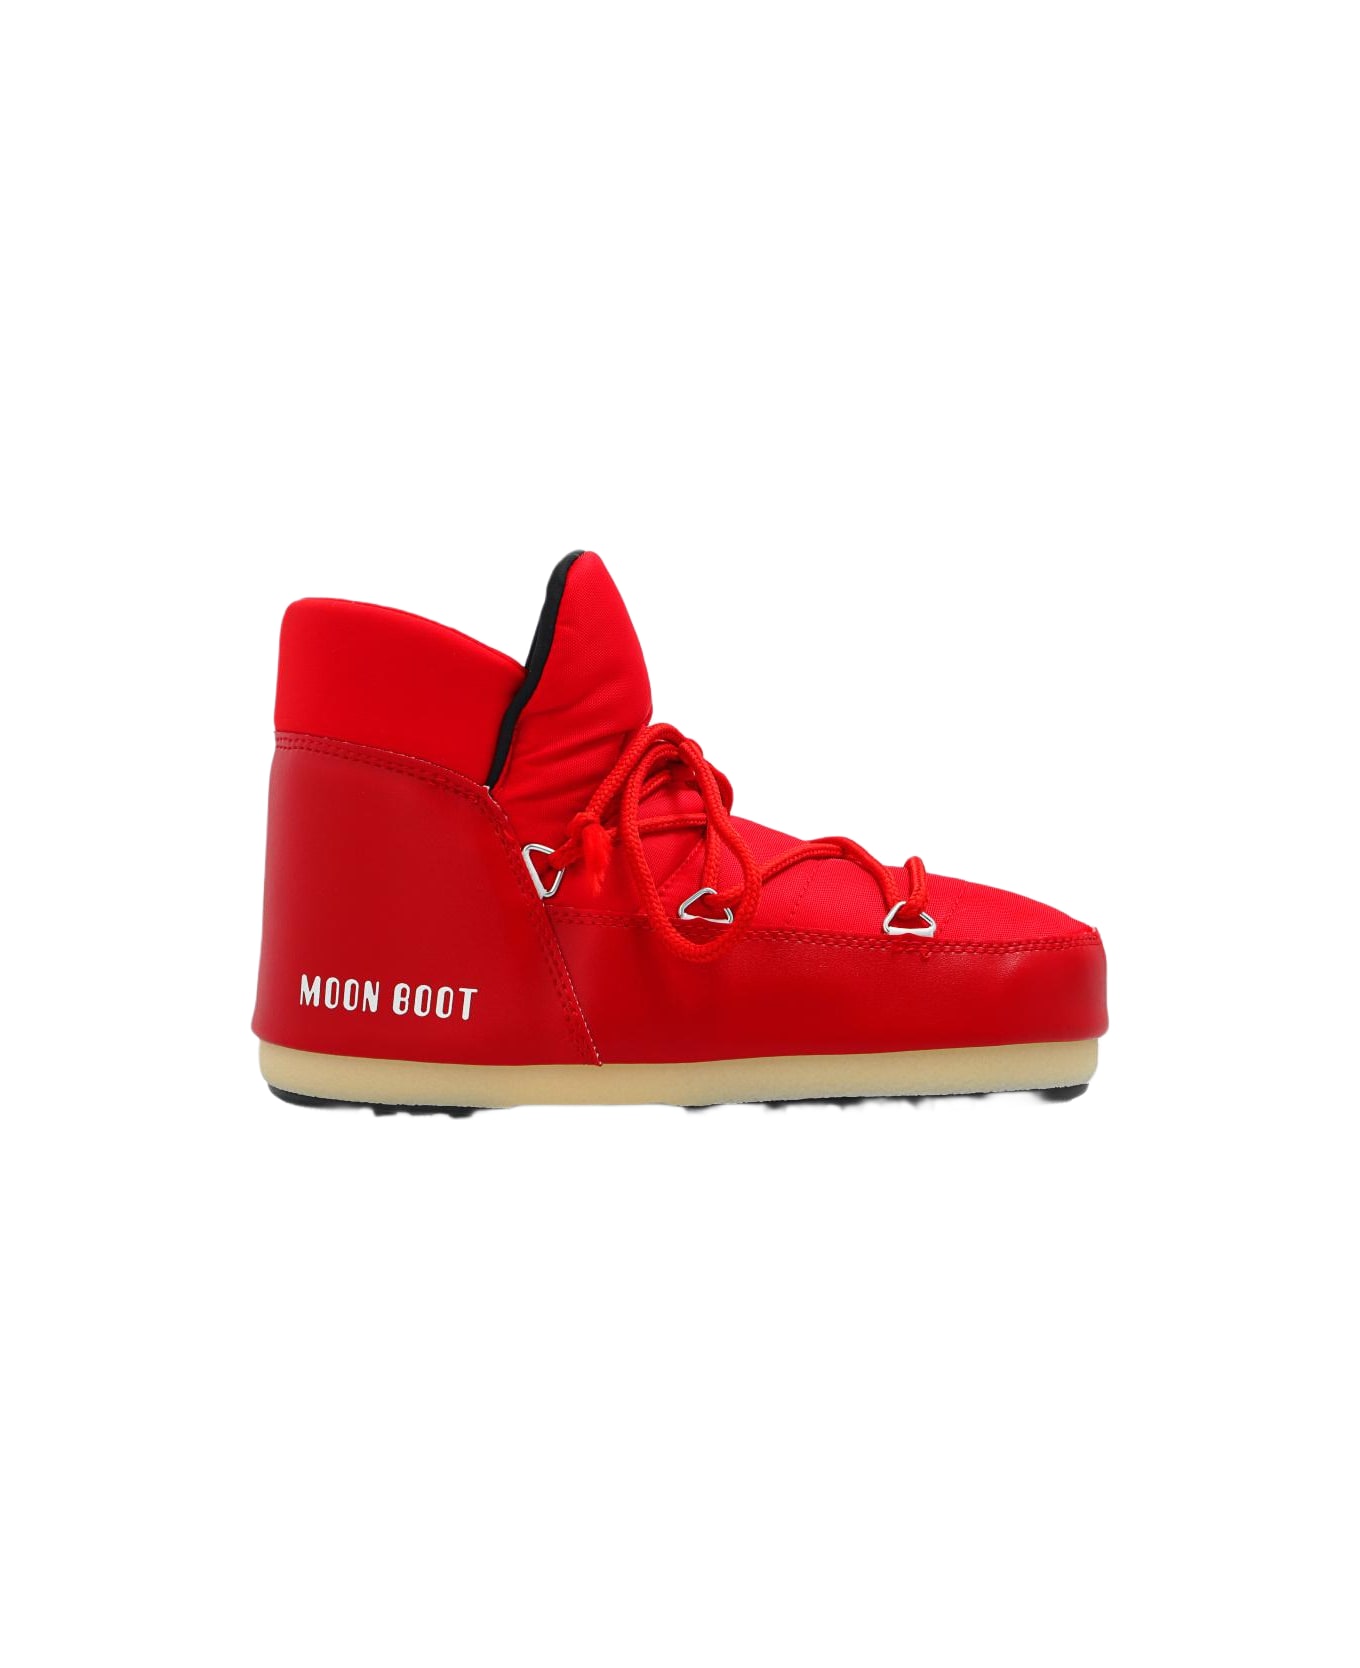 Moon Boot 'pumps Nylon' Snow Boots - RED